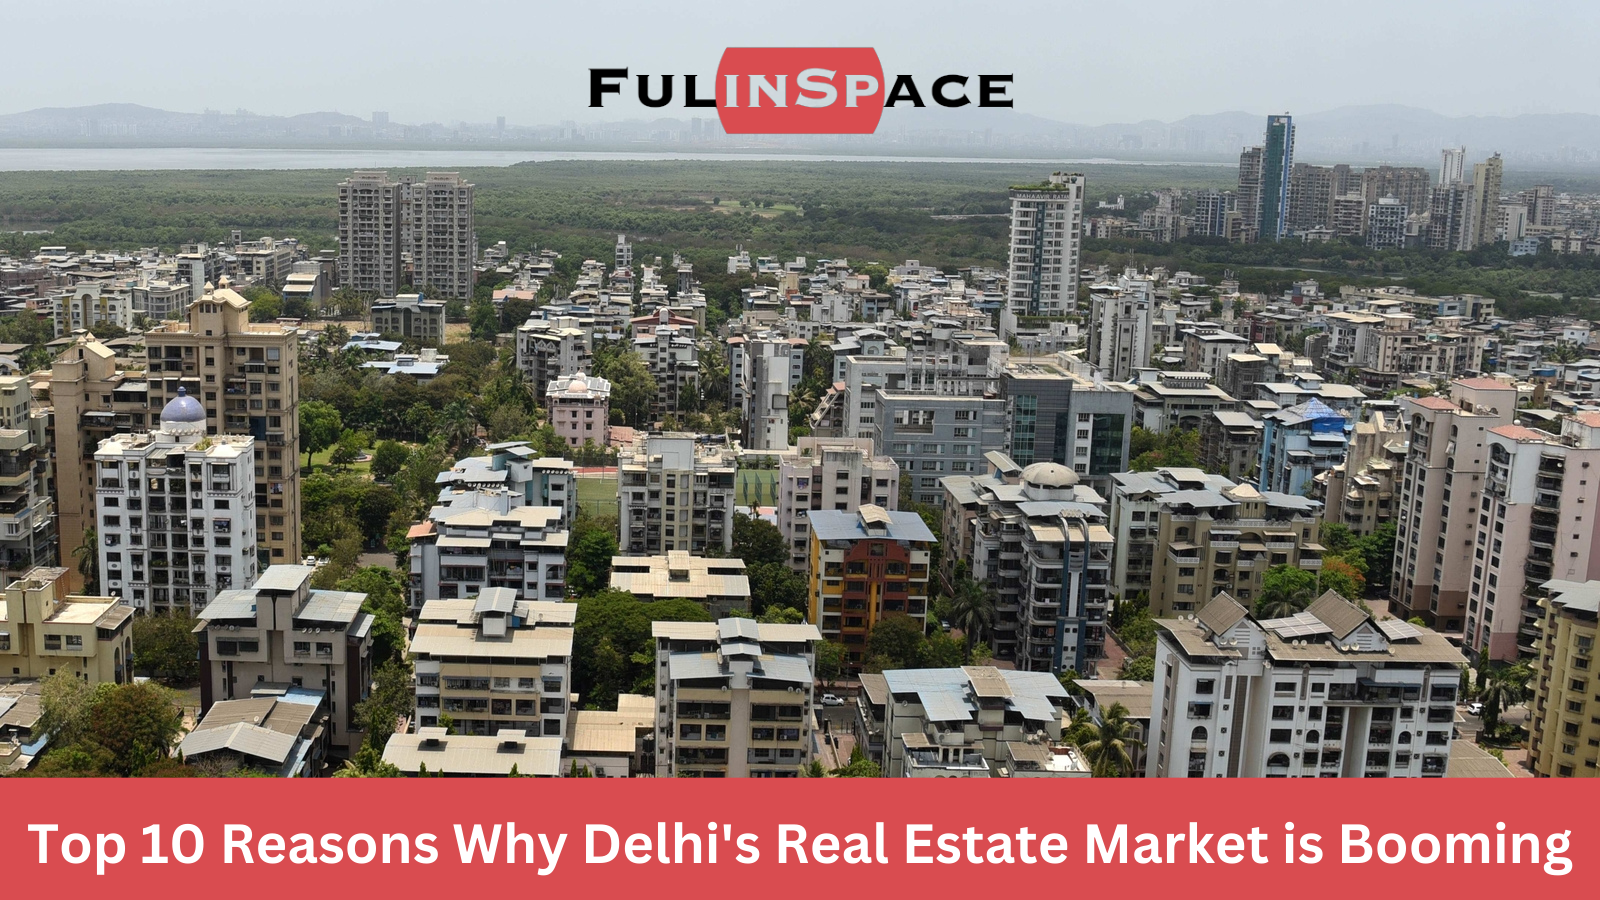 Top 10 Reasons Why Delhi's Real Estate Market is Booming